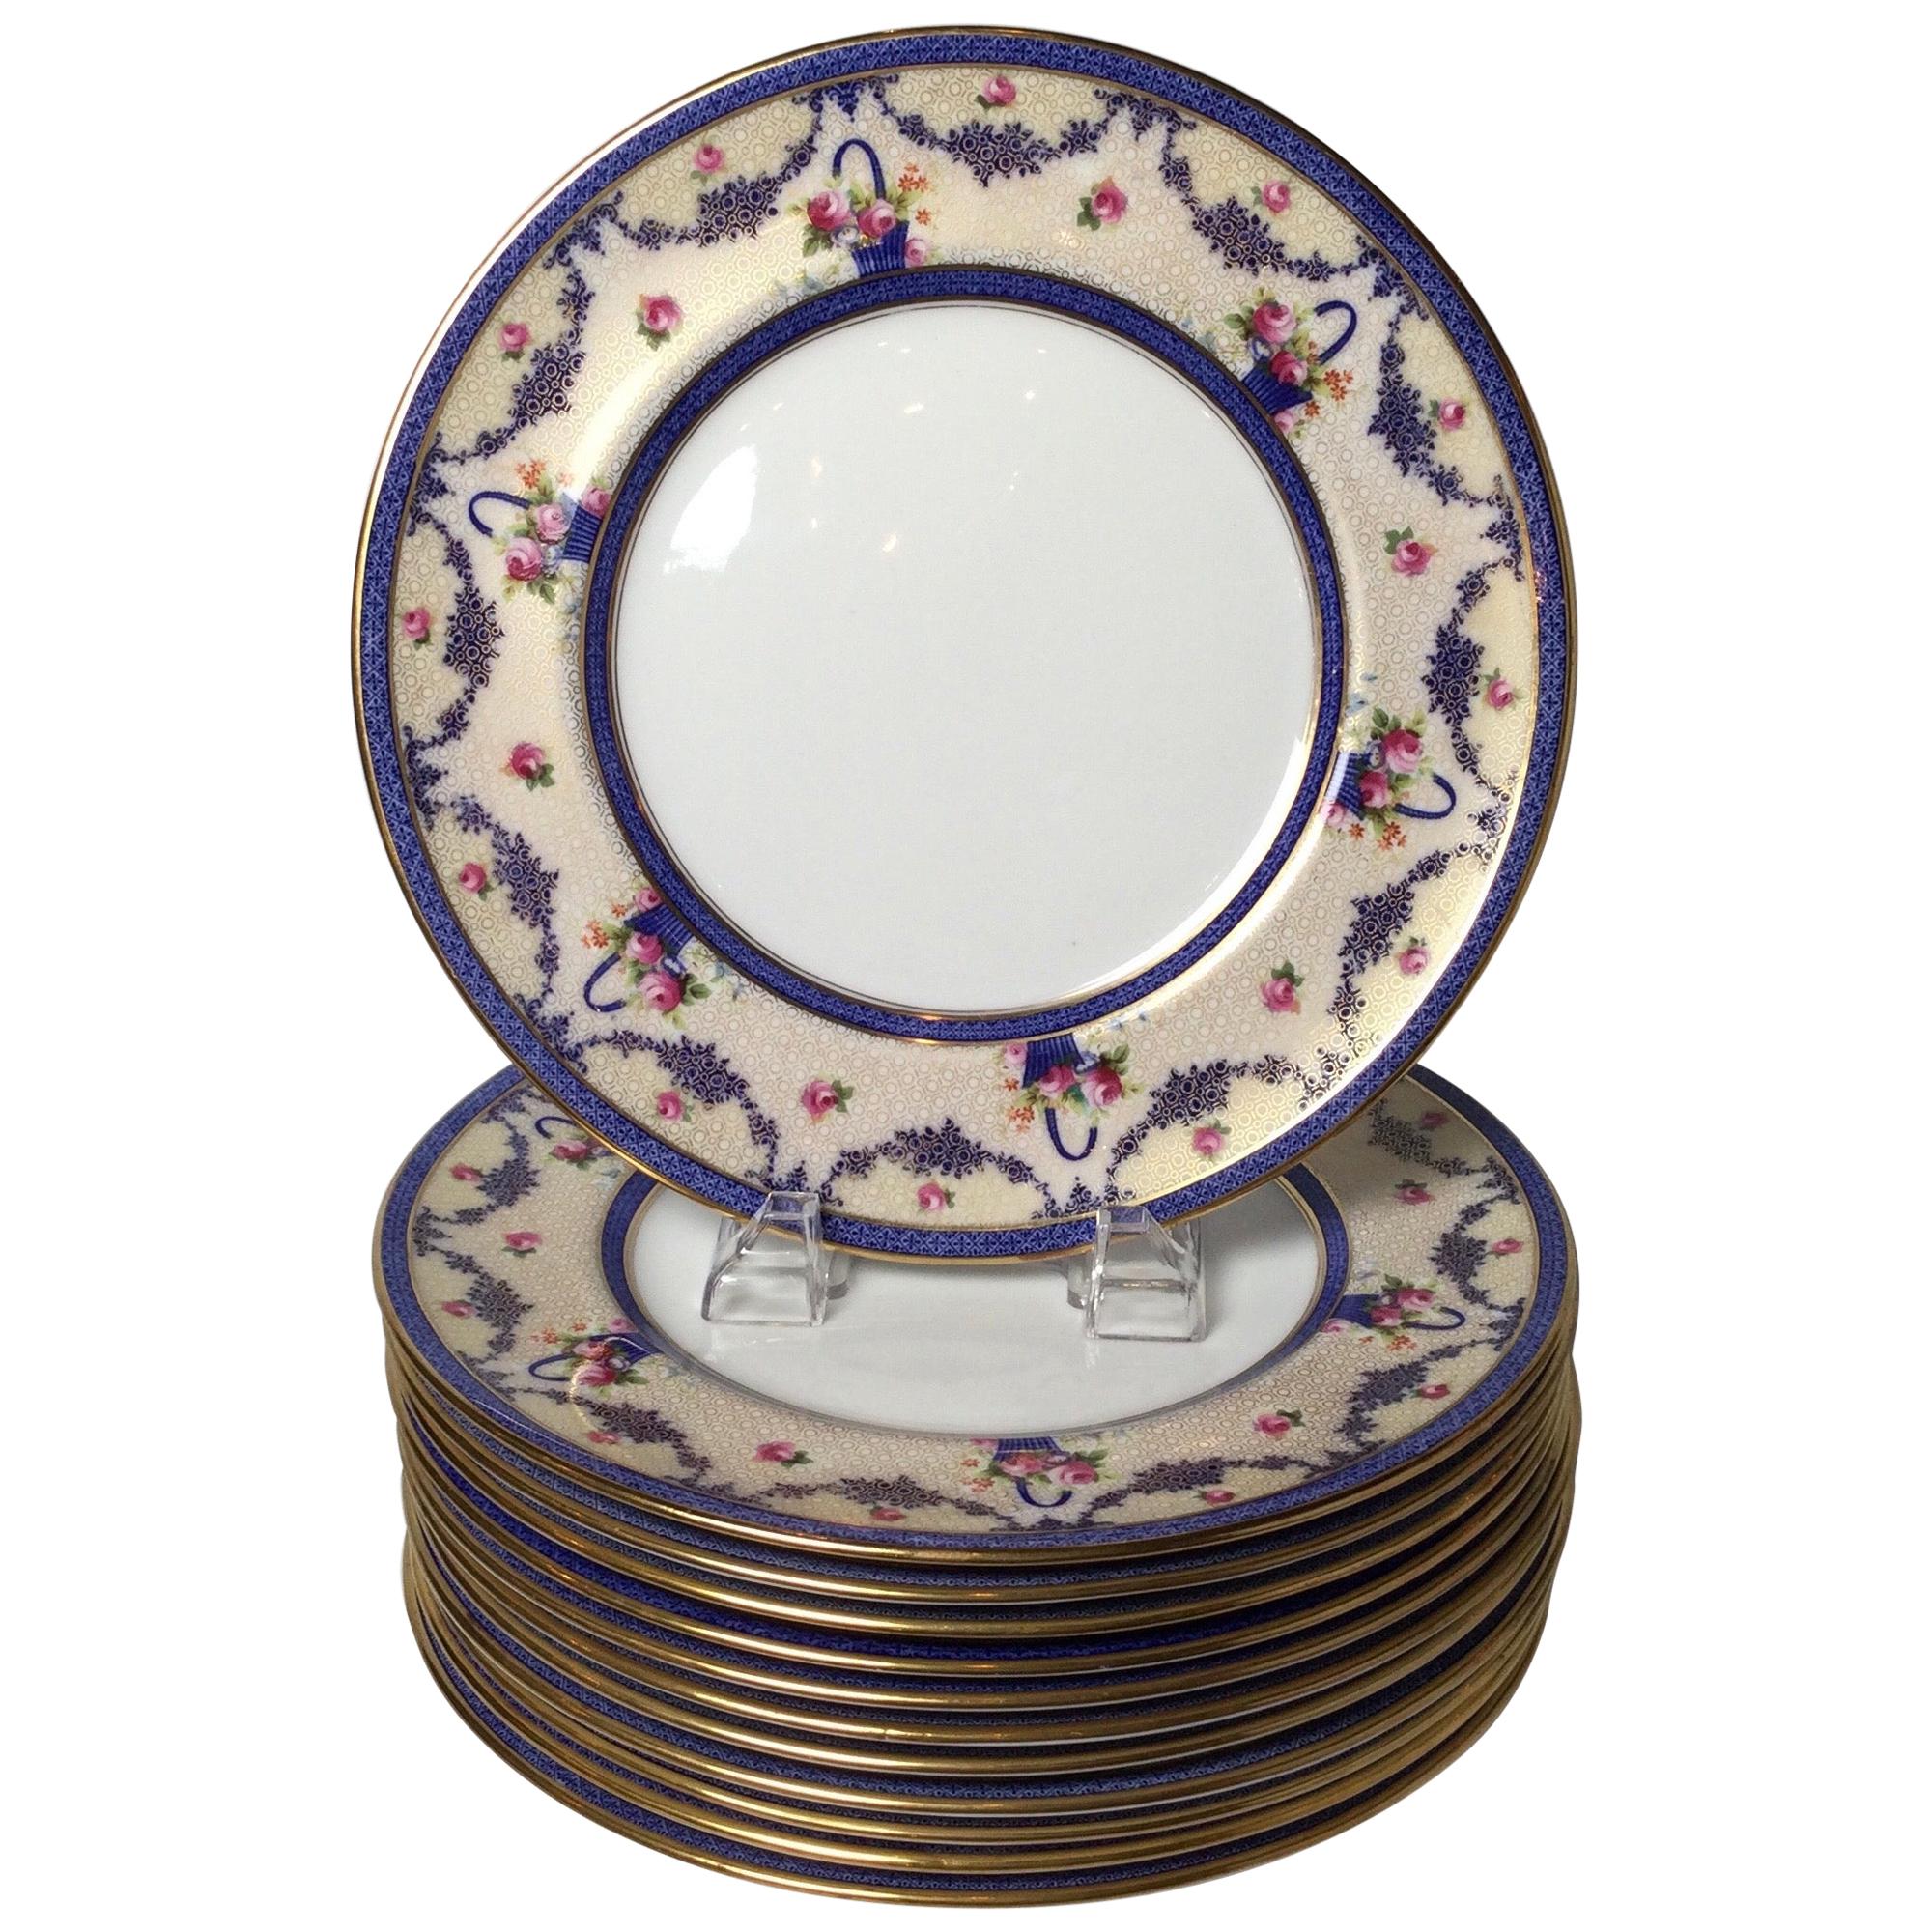 Set of 12 English Gilt and Floral Service Dinner Plates, circa 1910